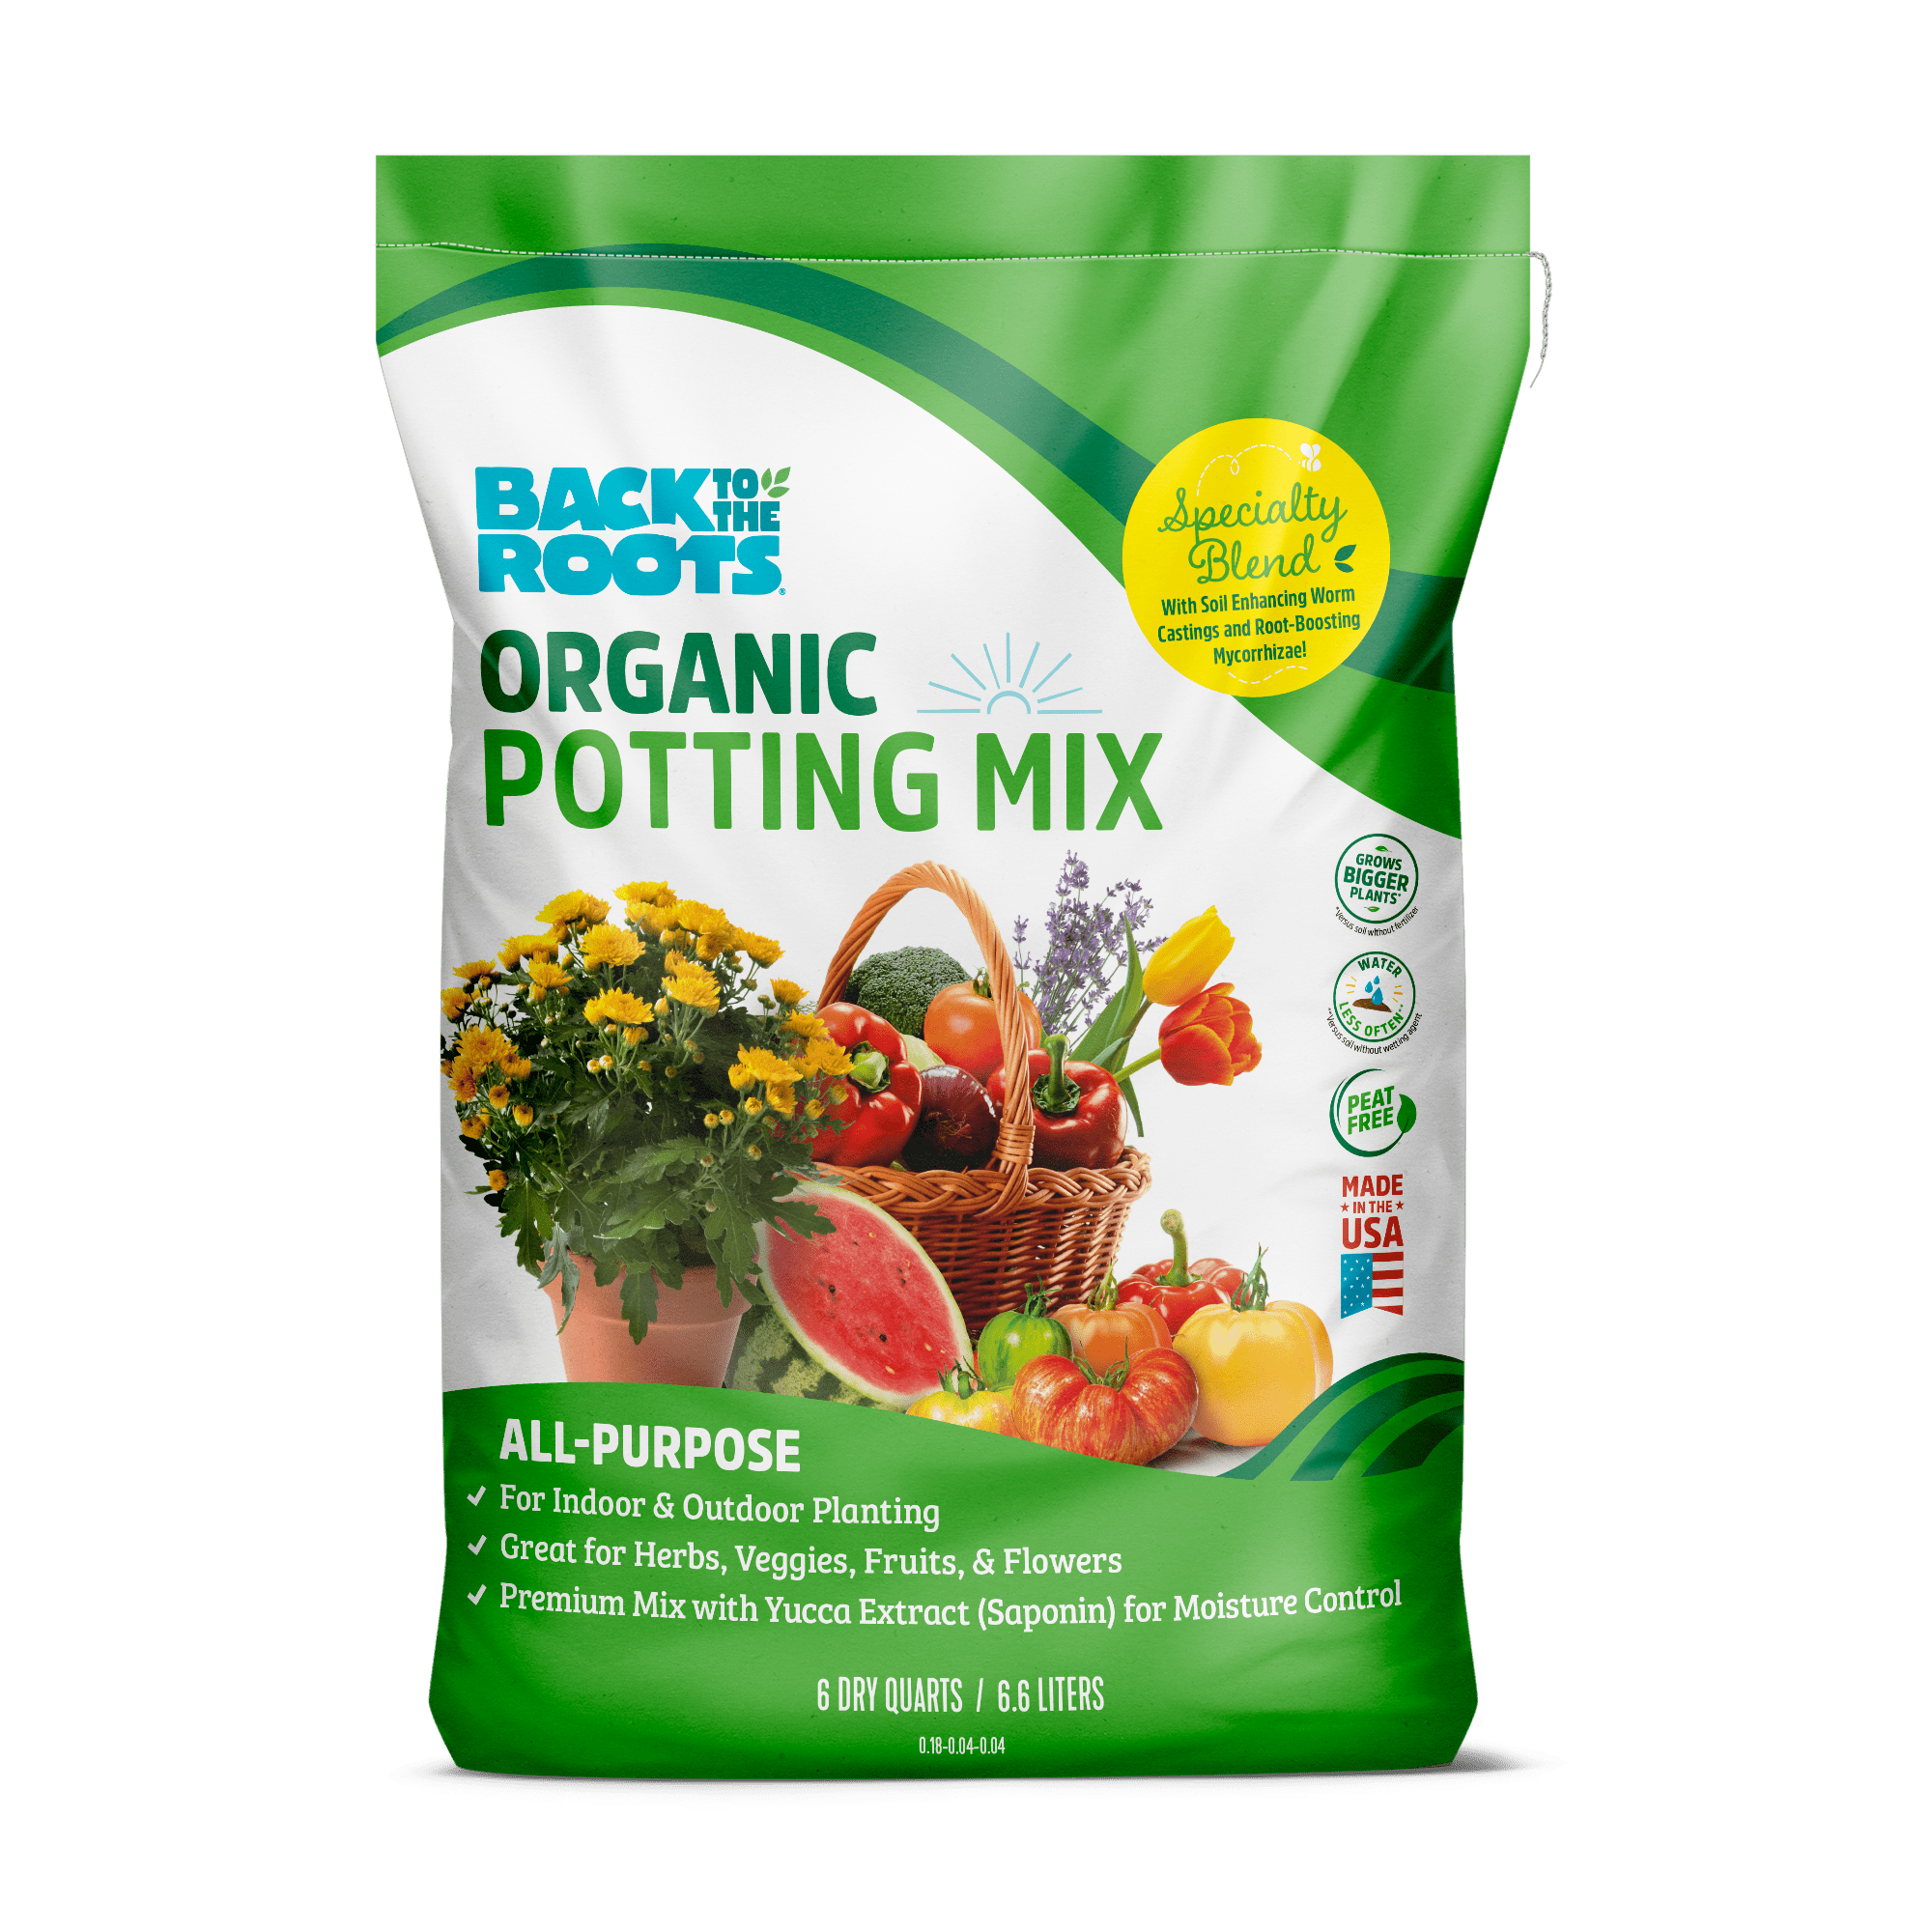 Back to the Roots Natural and Organic All-Purpose Potting Mix Soil, 6.6 Liter Bag